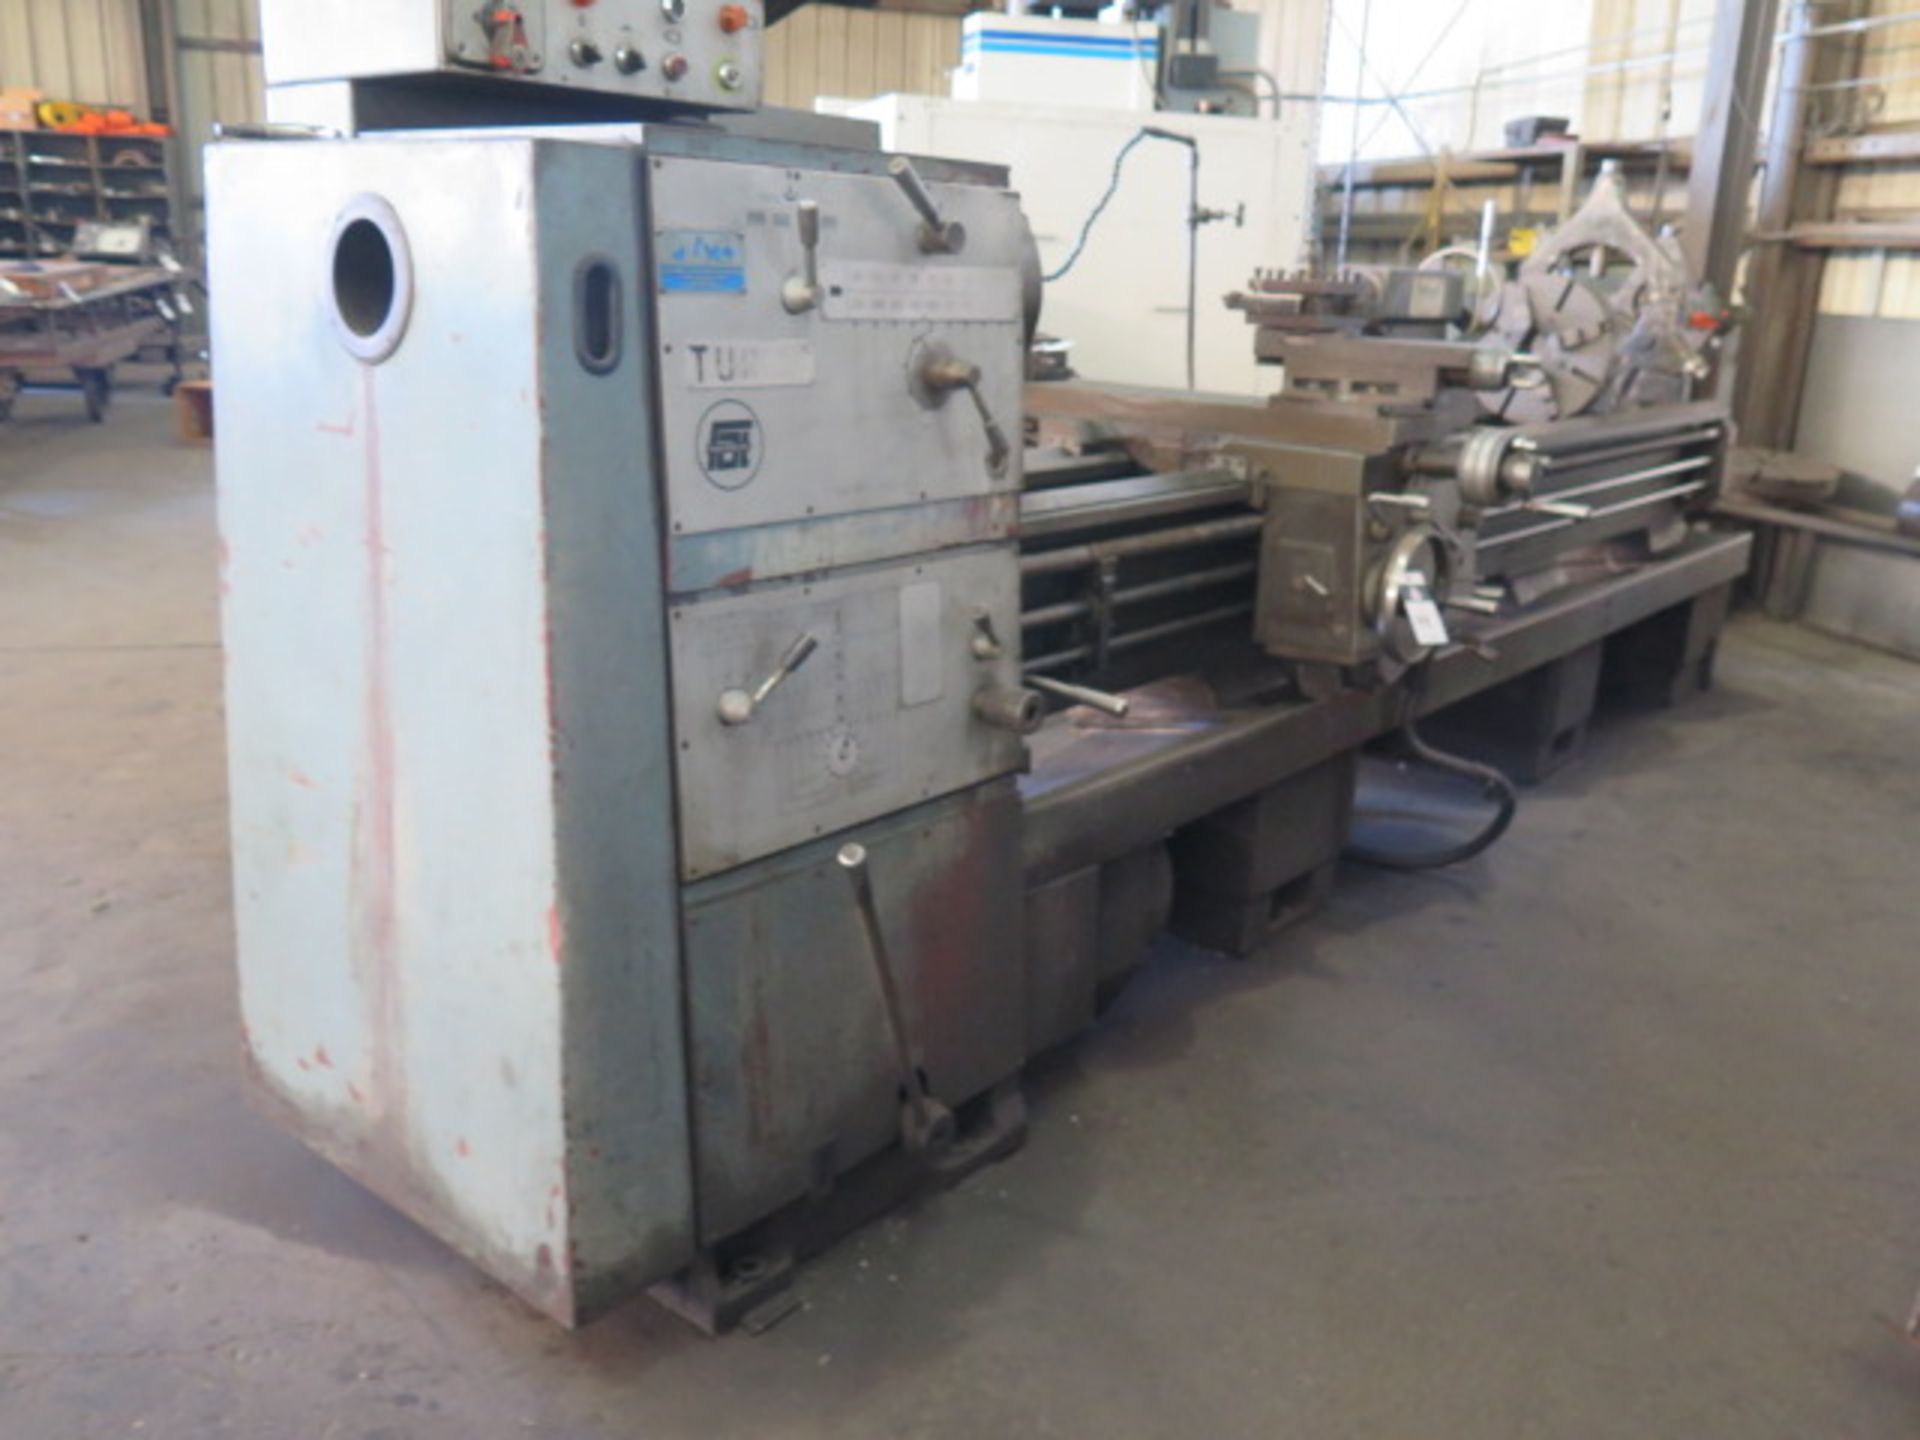 Ponar TUR-63 25” x 128” Geared Head Lathe s/n 1310 w/ 28-1200 RPM, 3 ½” Thru Spindle, SOLD AS IS - Image 2 of 14